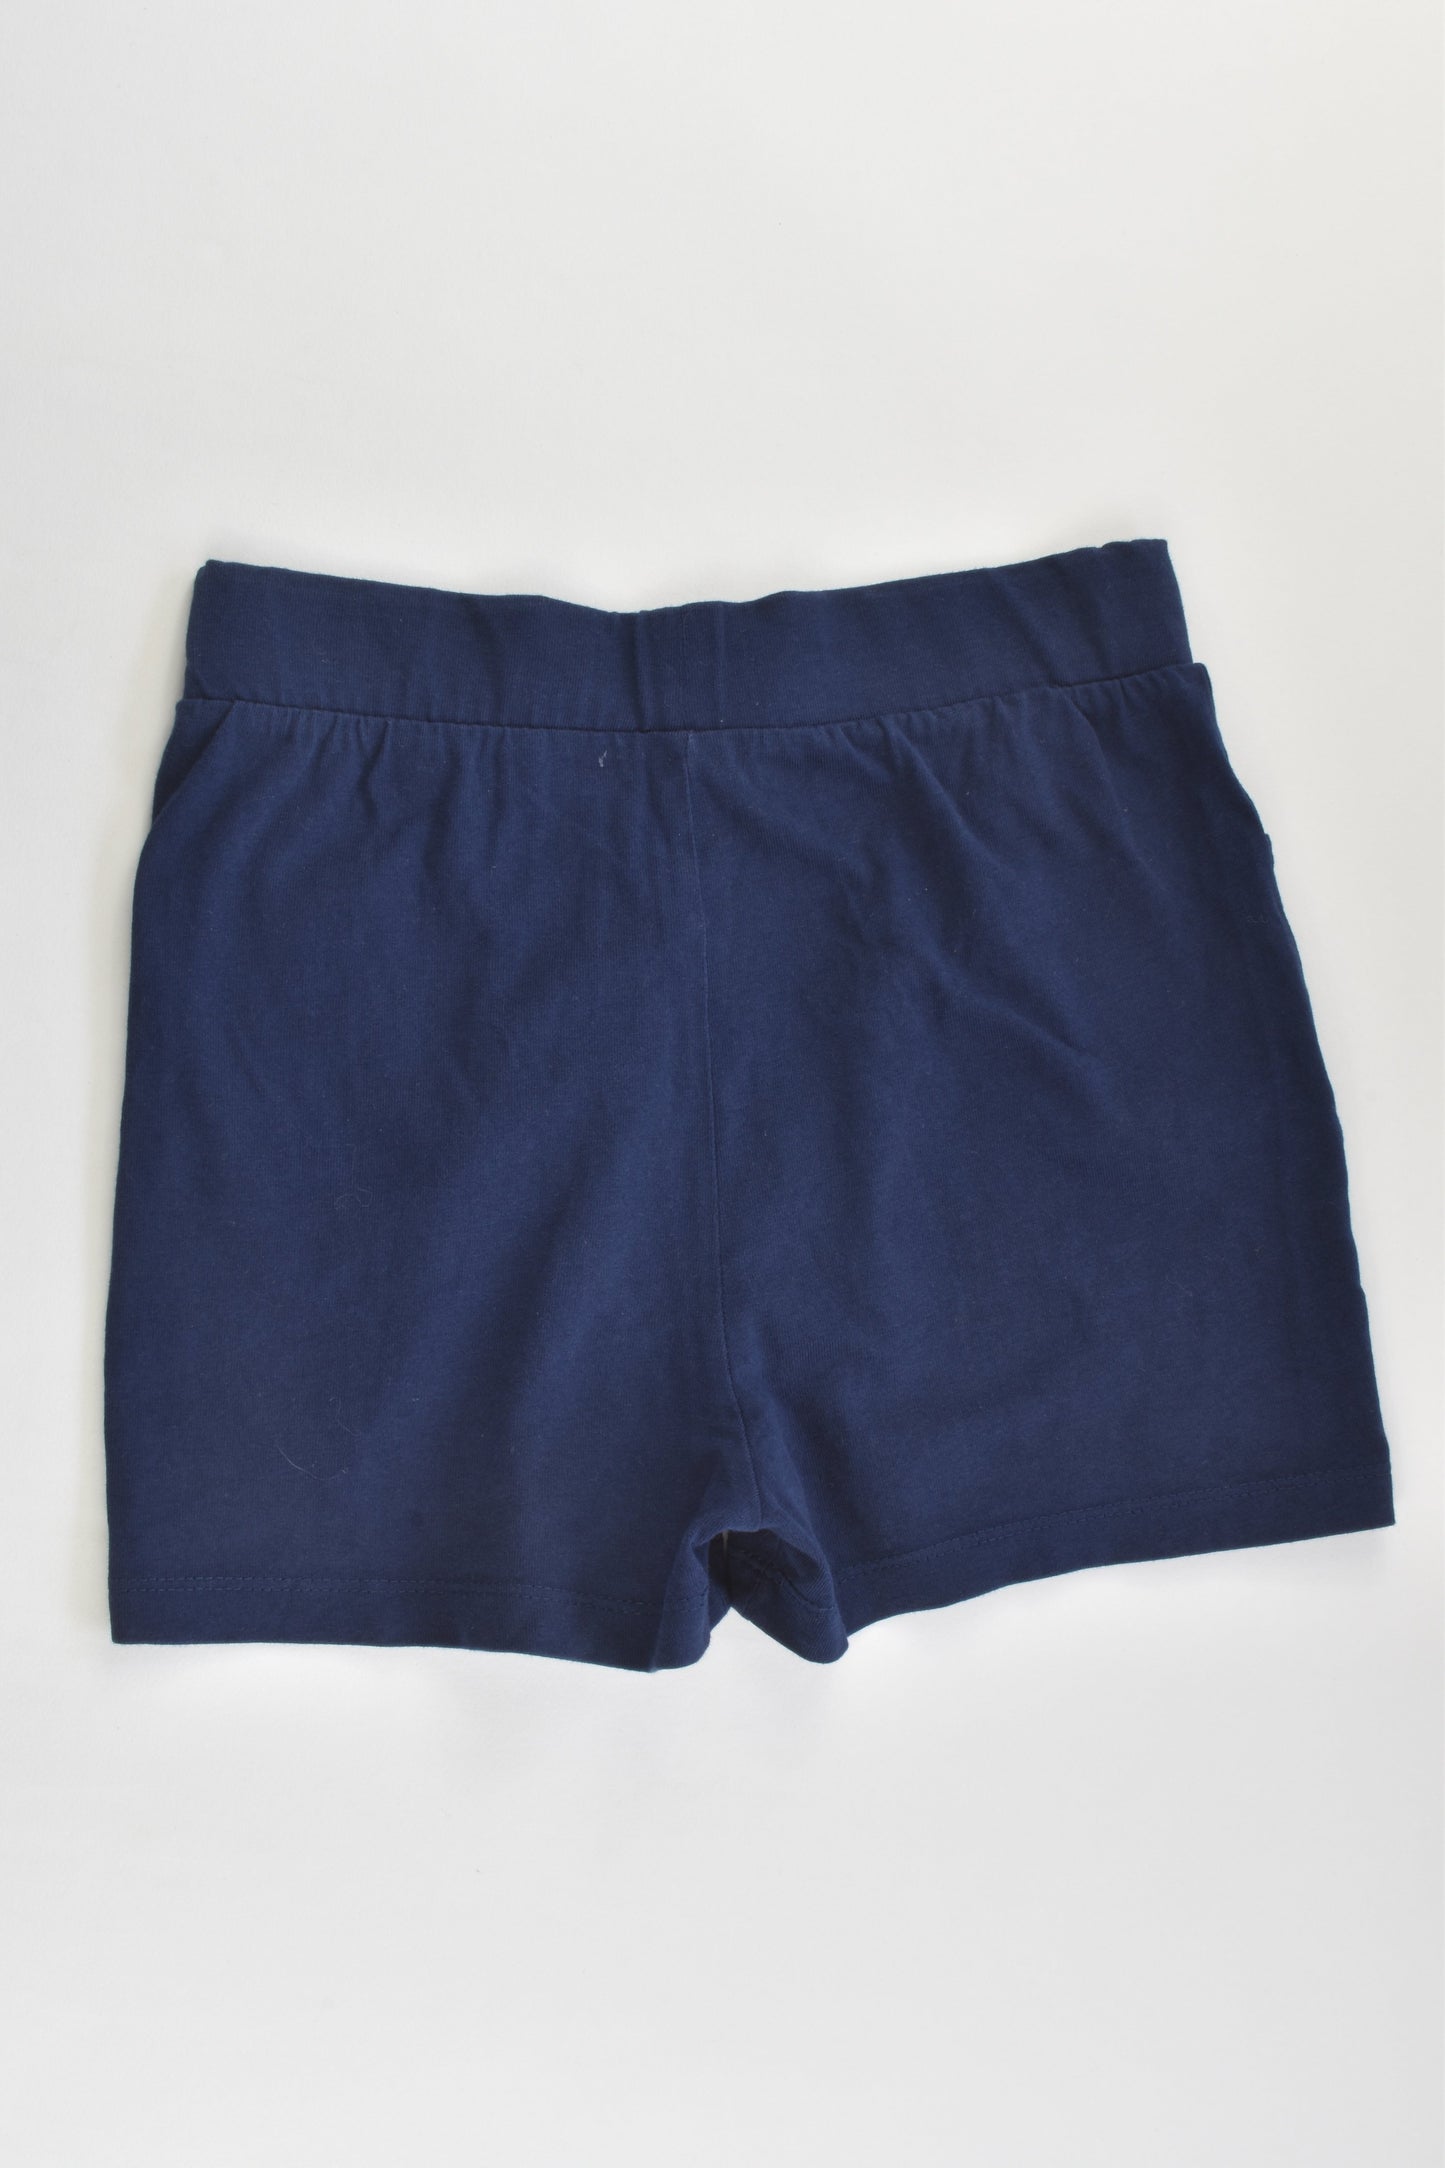 H&T Size 7 Shorts